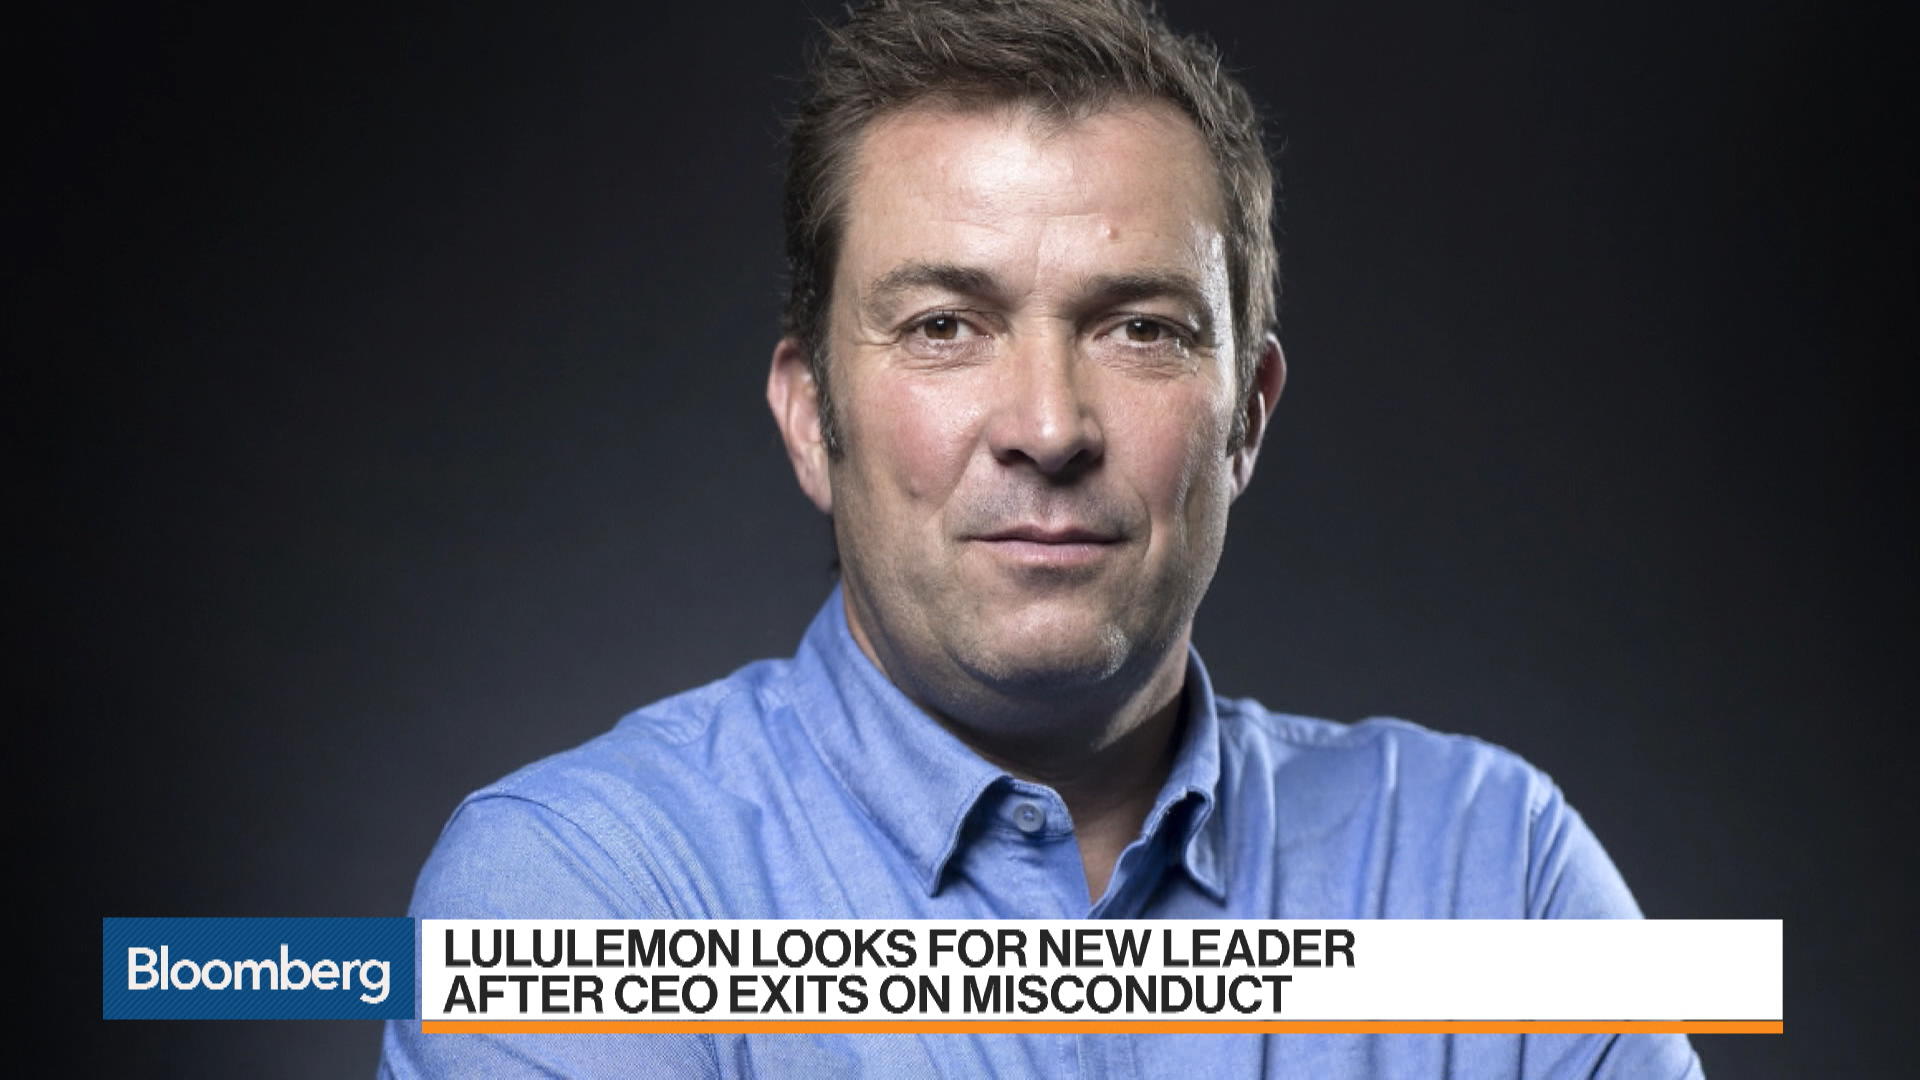 Lululemon CEO resigns after over 4 years at the helm